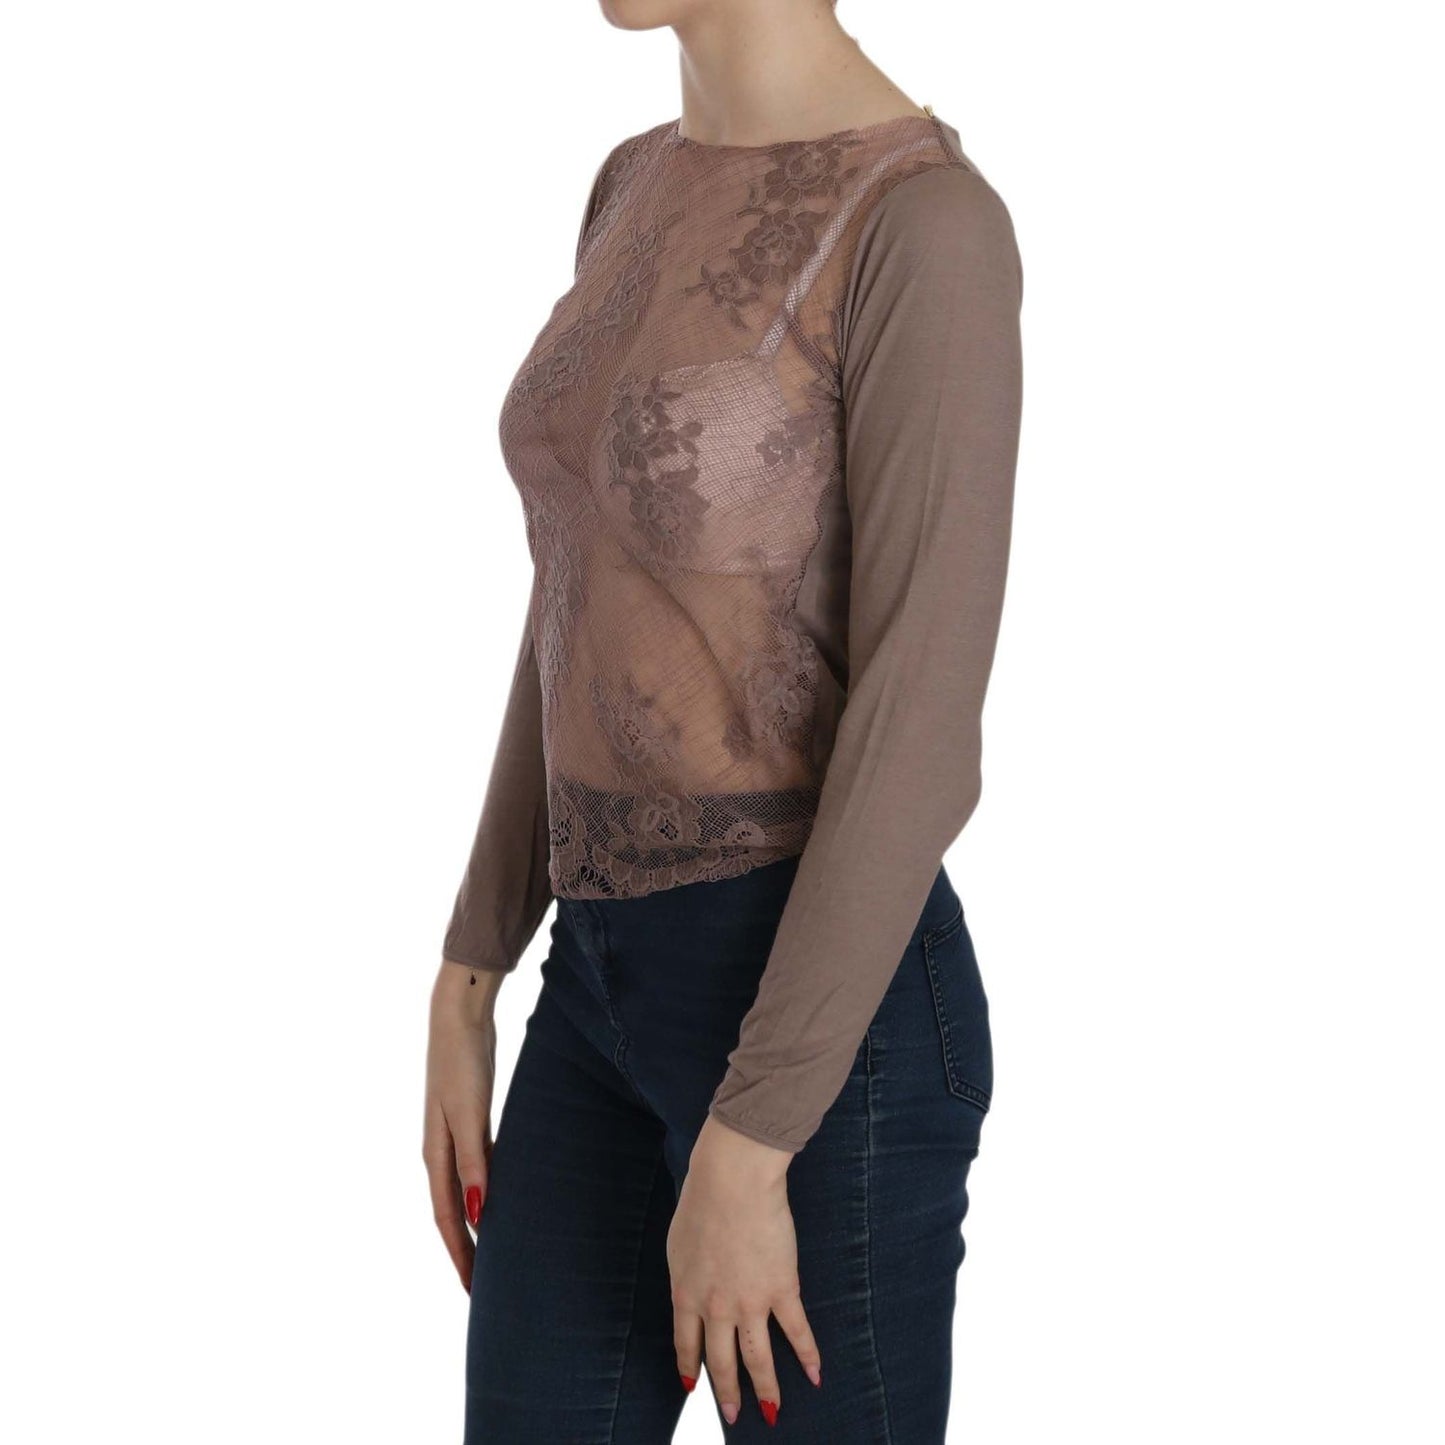 PINK MEMORIES Boat Neck Cotton Lace Blouse brown-lace-see-through-long-sleeve-top IMG_2840-2e473104-f6a.jpg